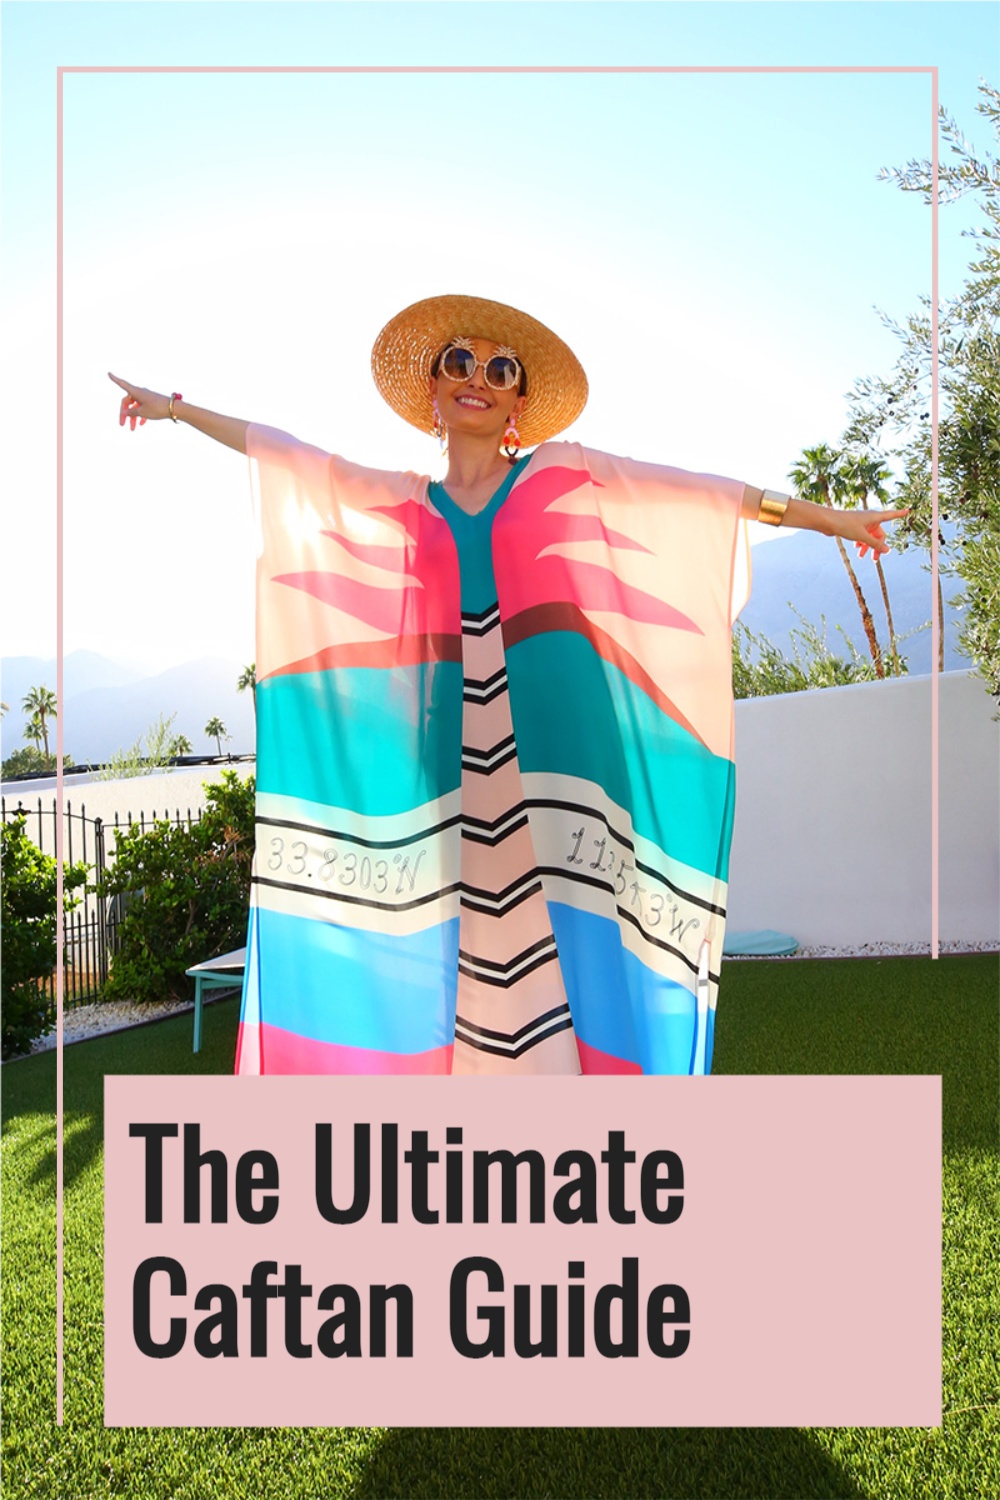 Caftan Shopping Guide: Where To Find 100 Fabulous Caftans + 10 Favorite Caftan Brands!